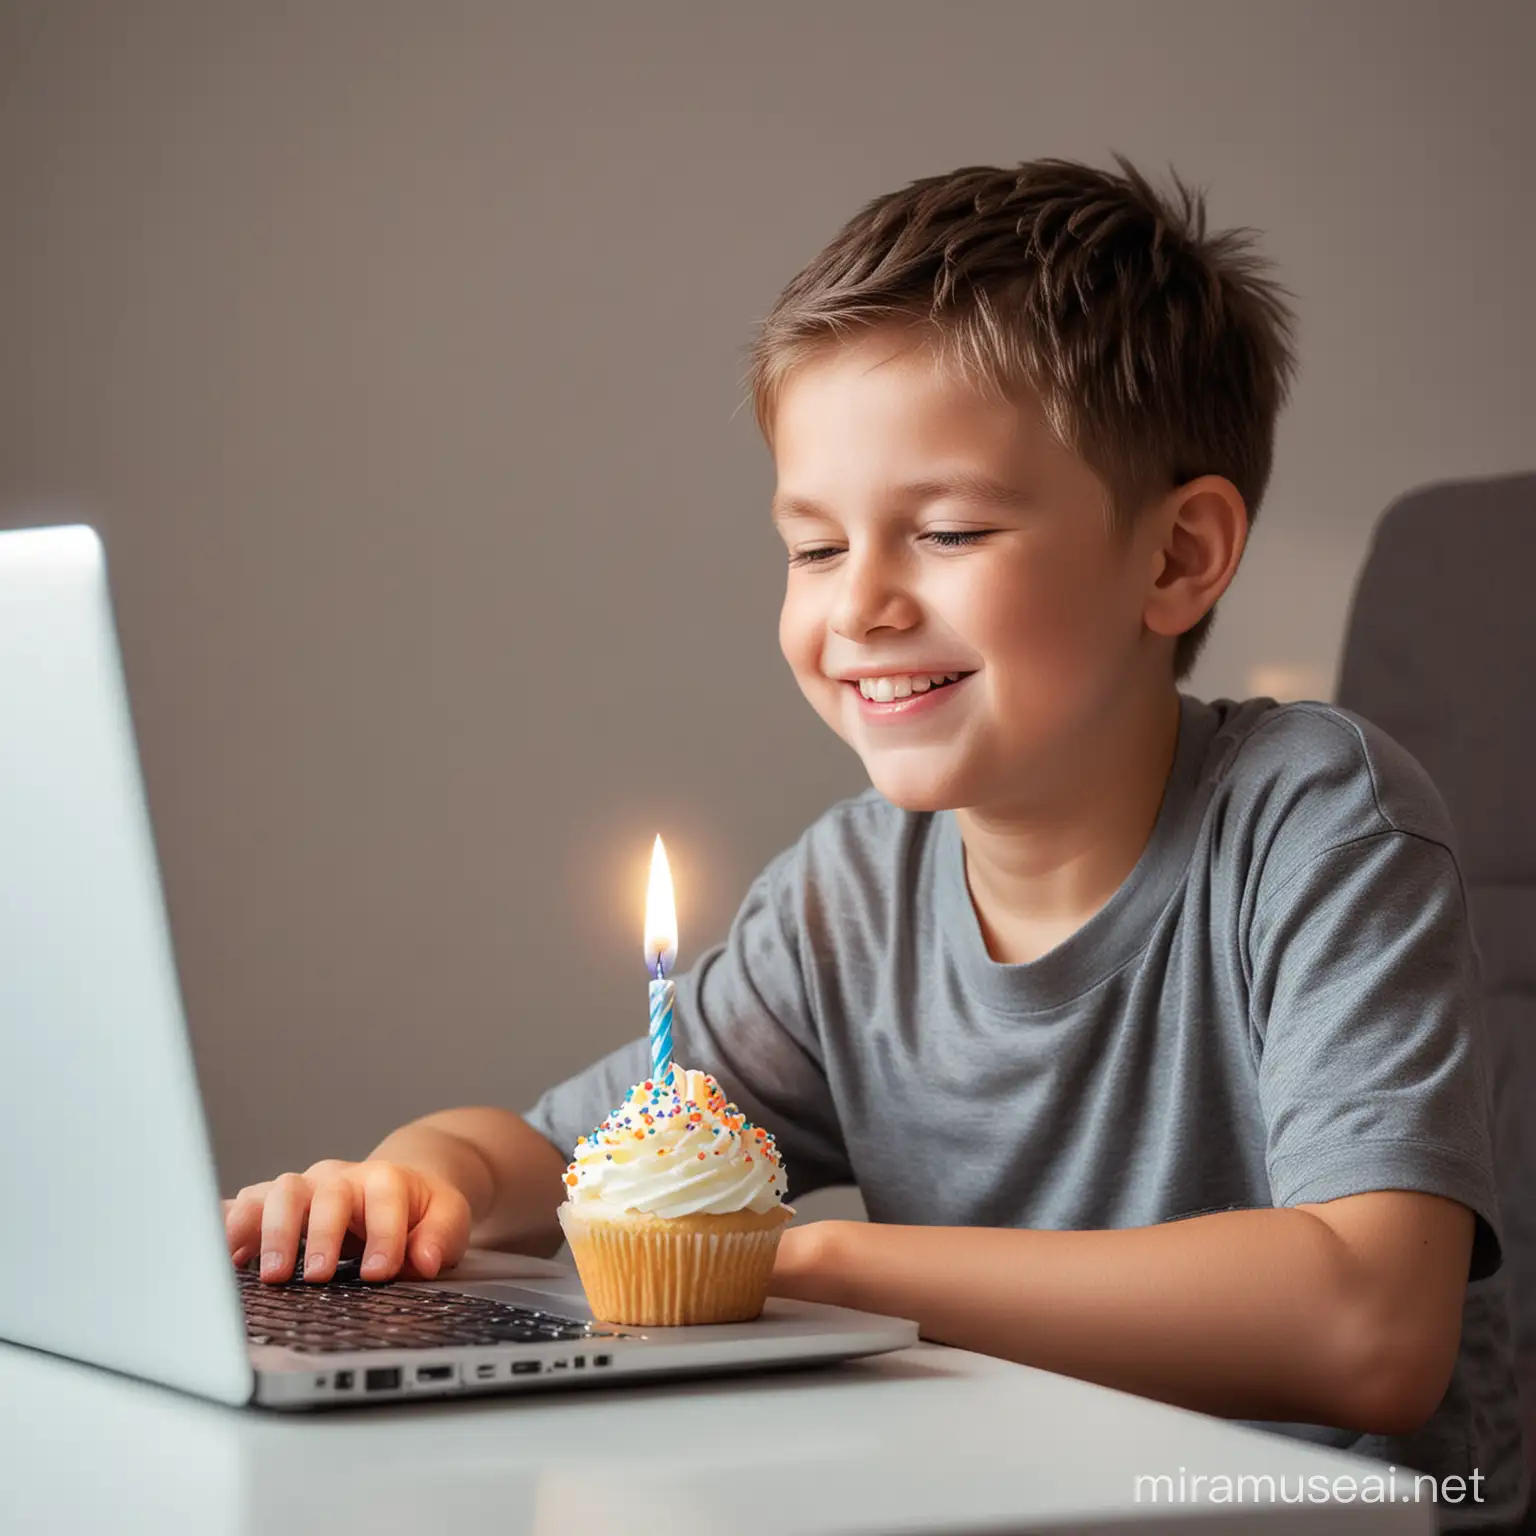 Young Software Engineer Celebrating Birthday with Laptop and Cupcake